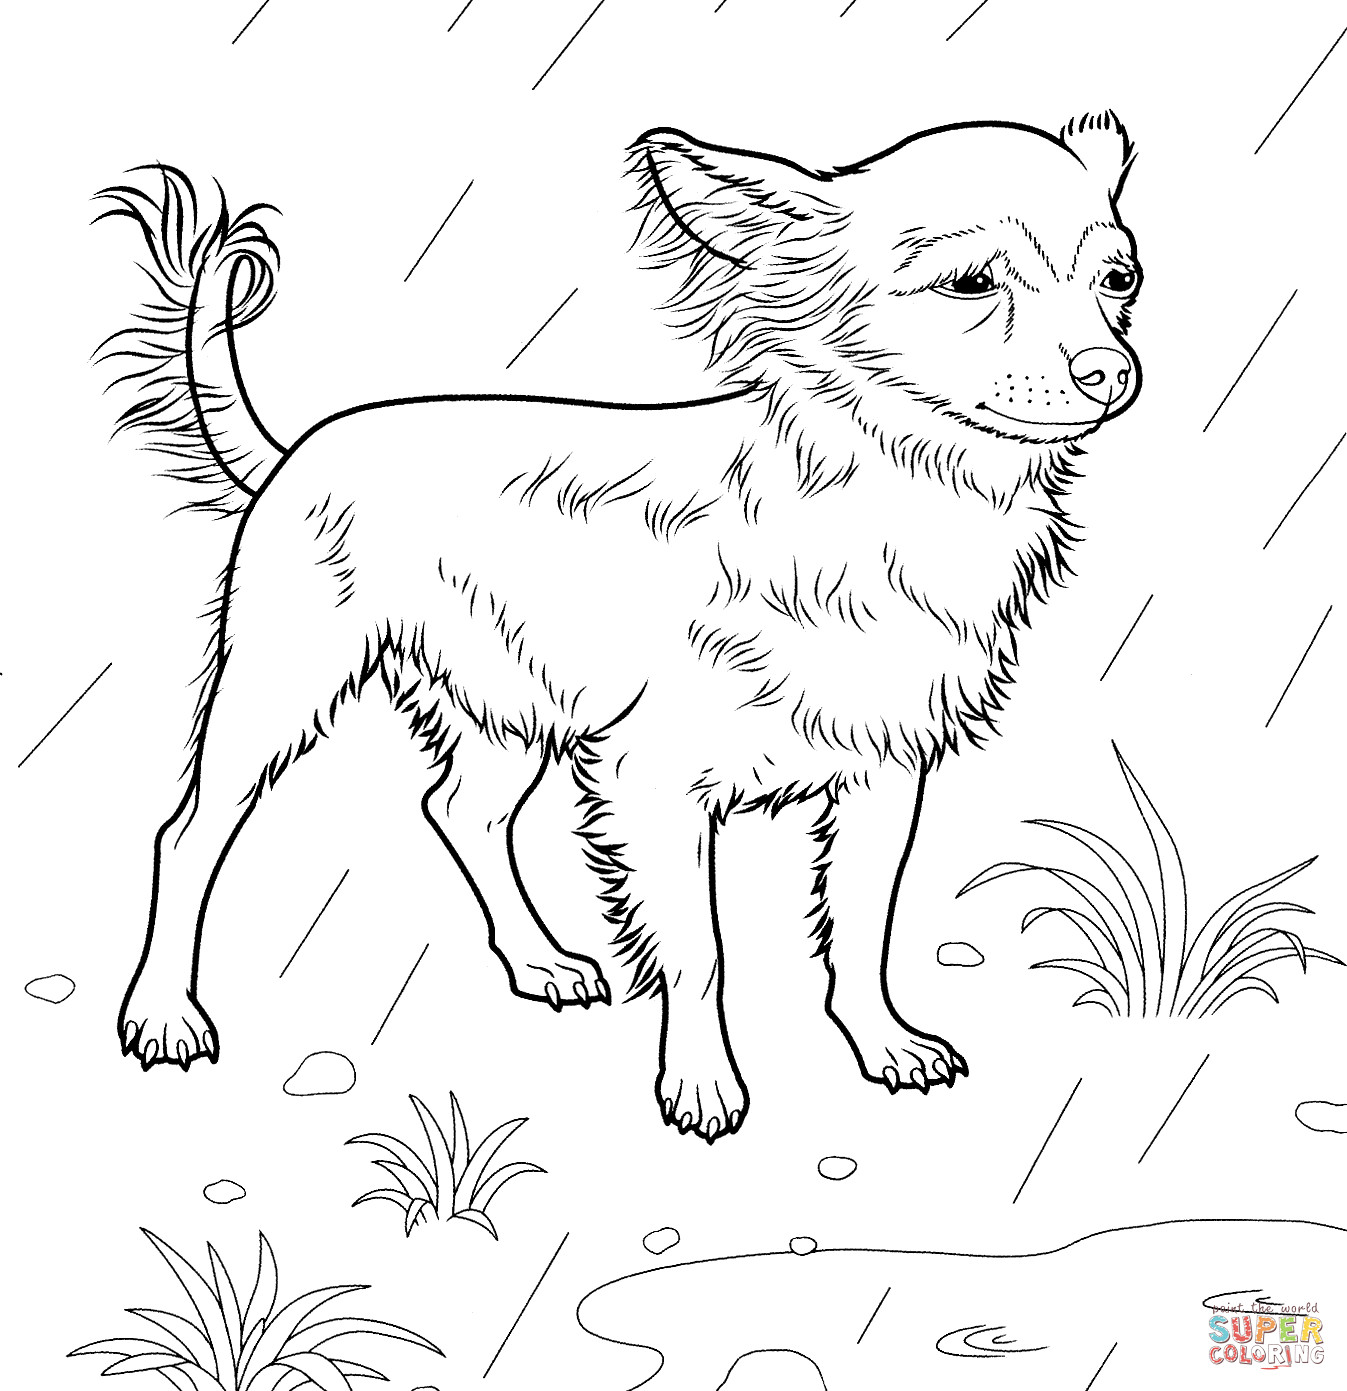 Chihuahua Coloring Pages
 Chihuahua coloring page